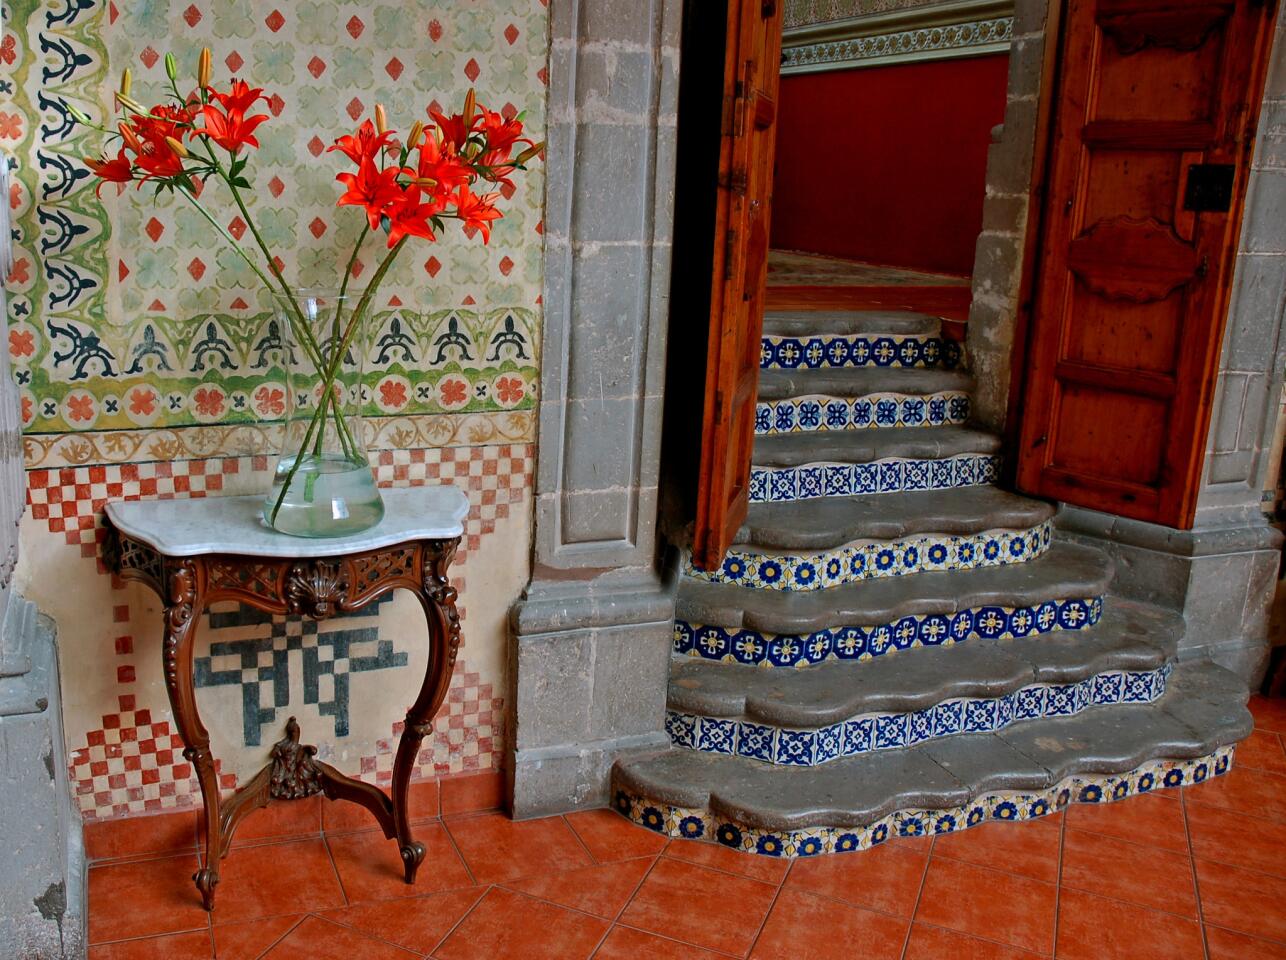 Mexico: Stencils, tiles and mystery